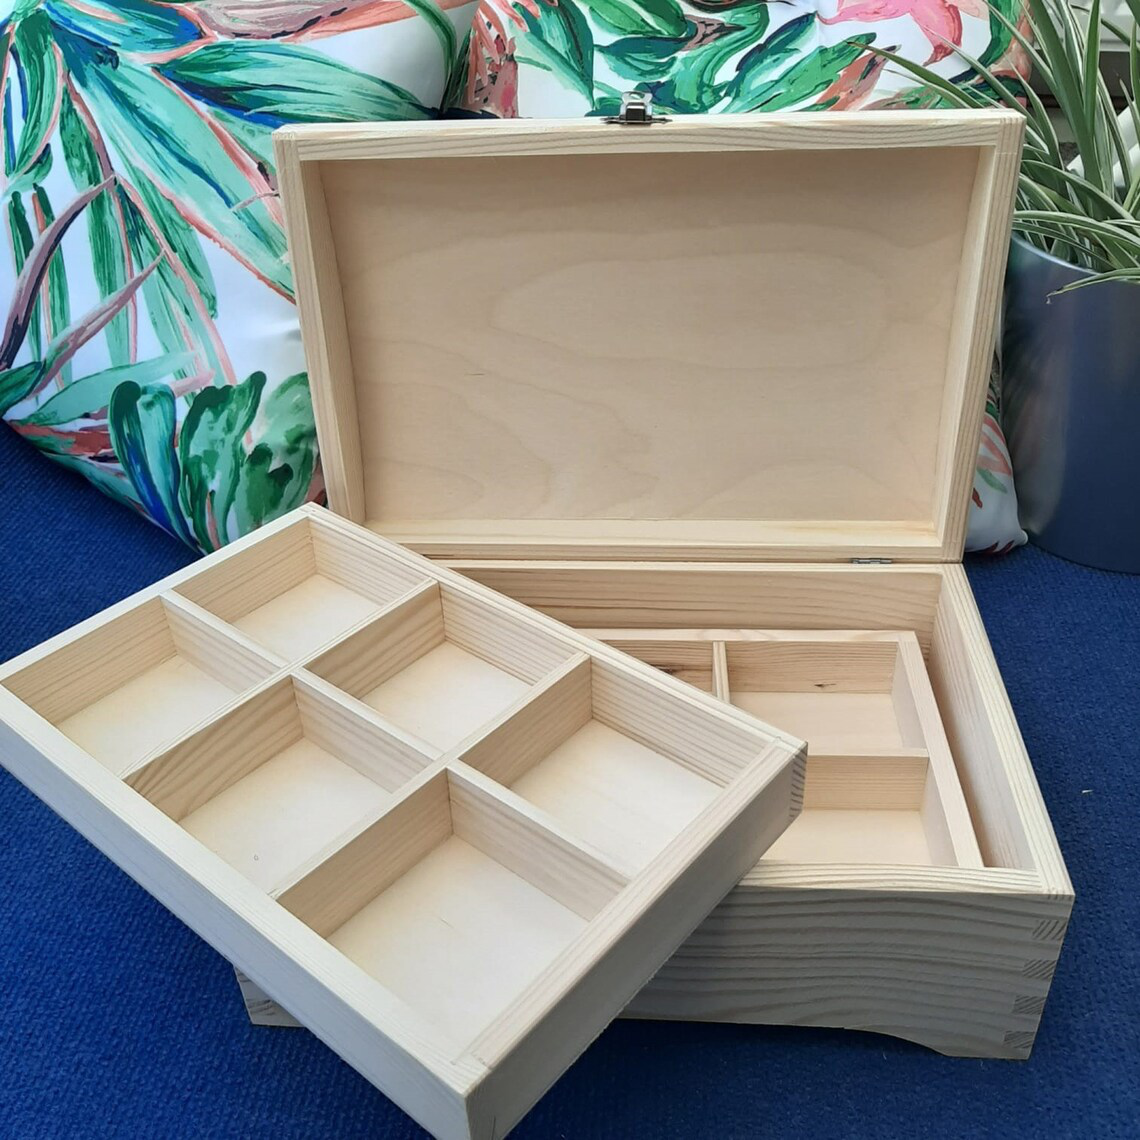 Wooden Storage Box with Trays